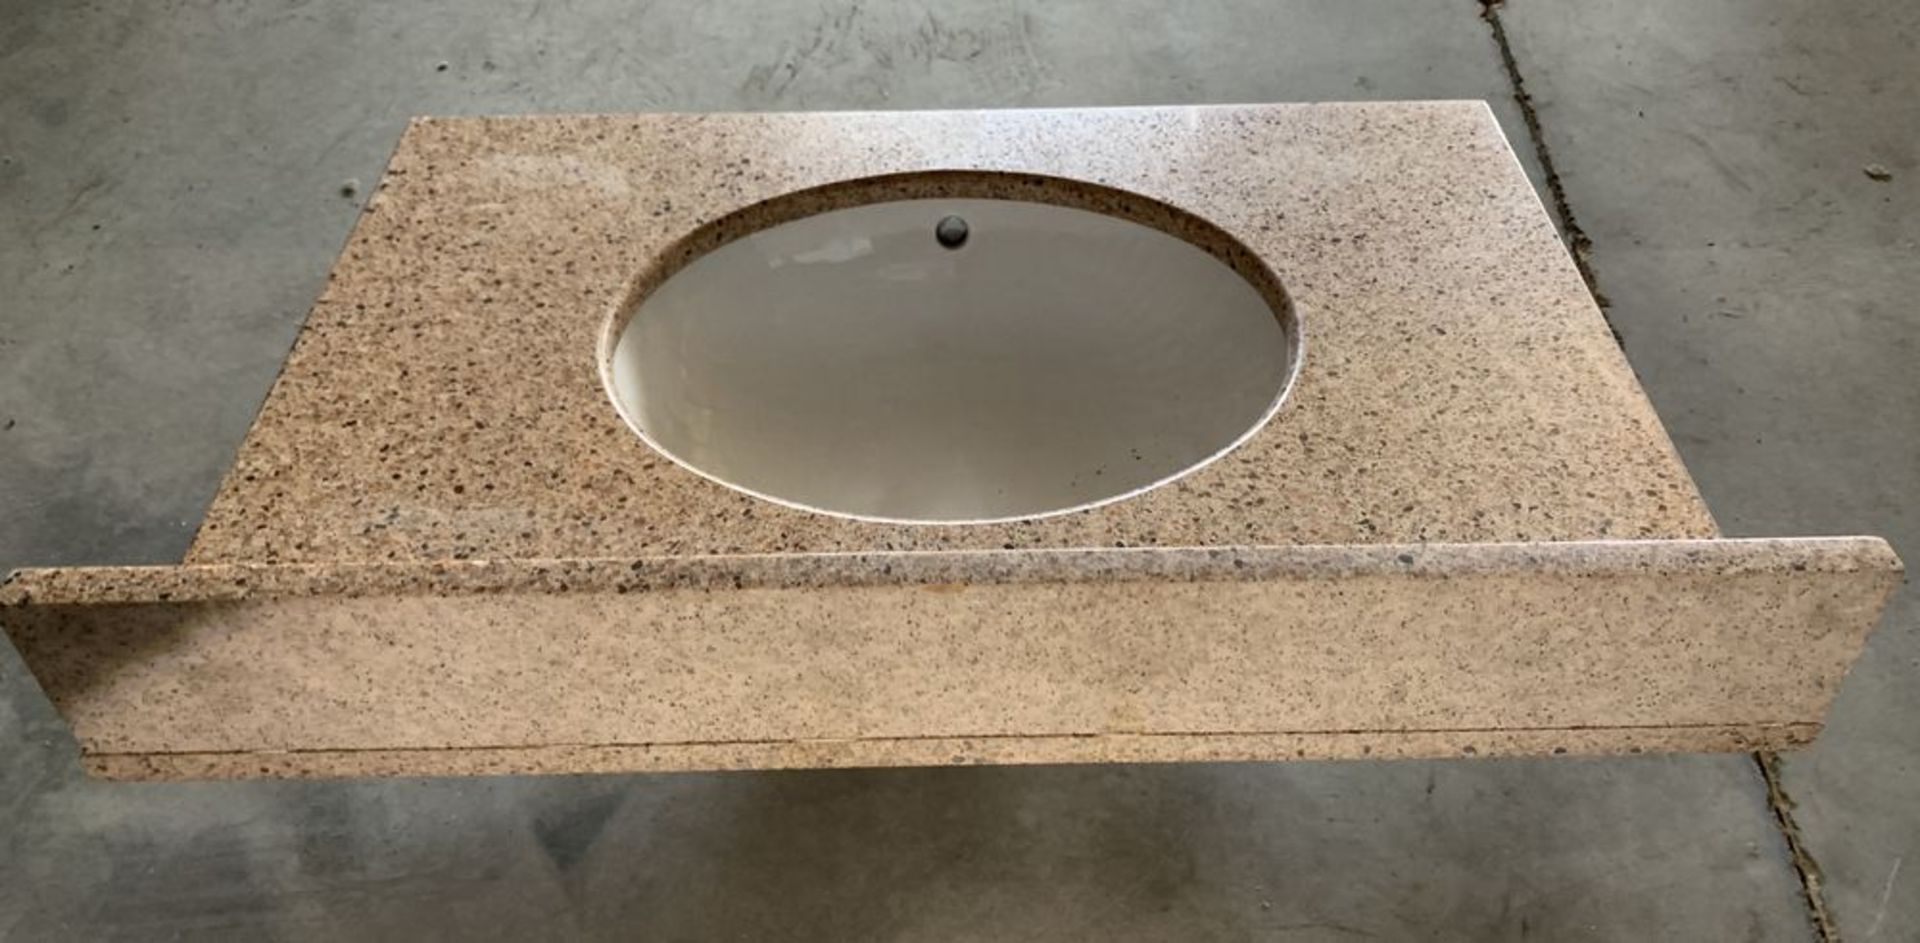 Lowes Quartz Stone Countertop and Sink, Install Ready, 32"x24" - Sand - Image 4 of 4